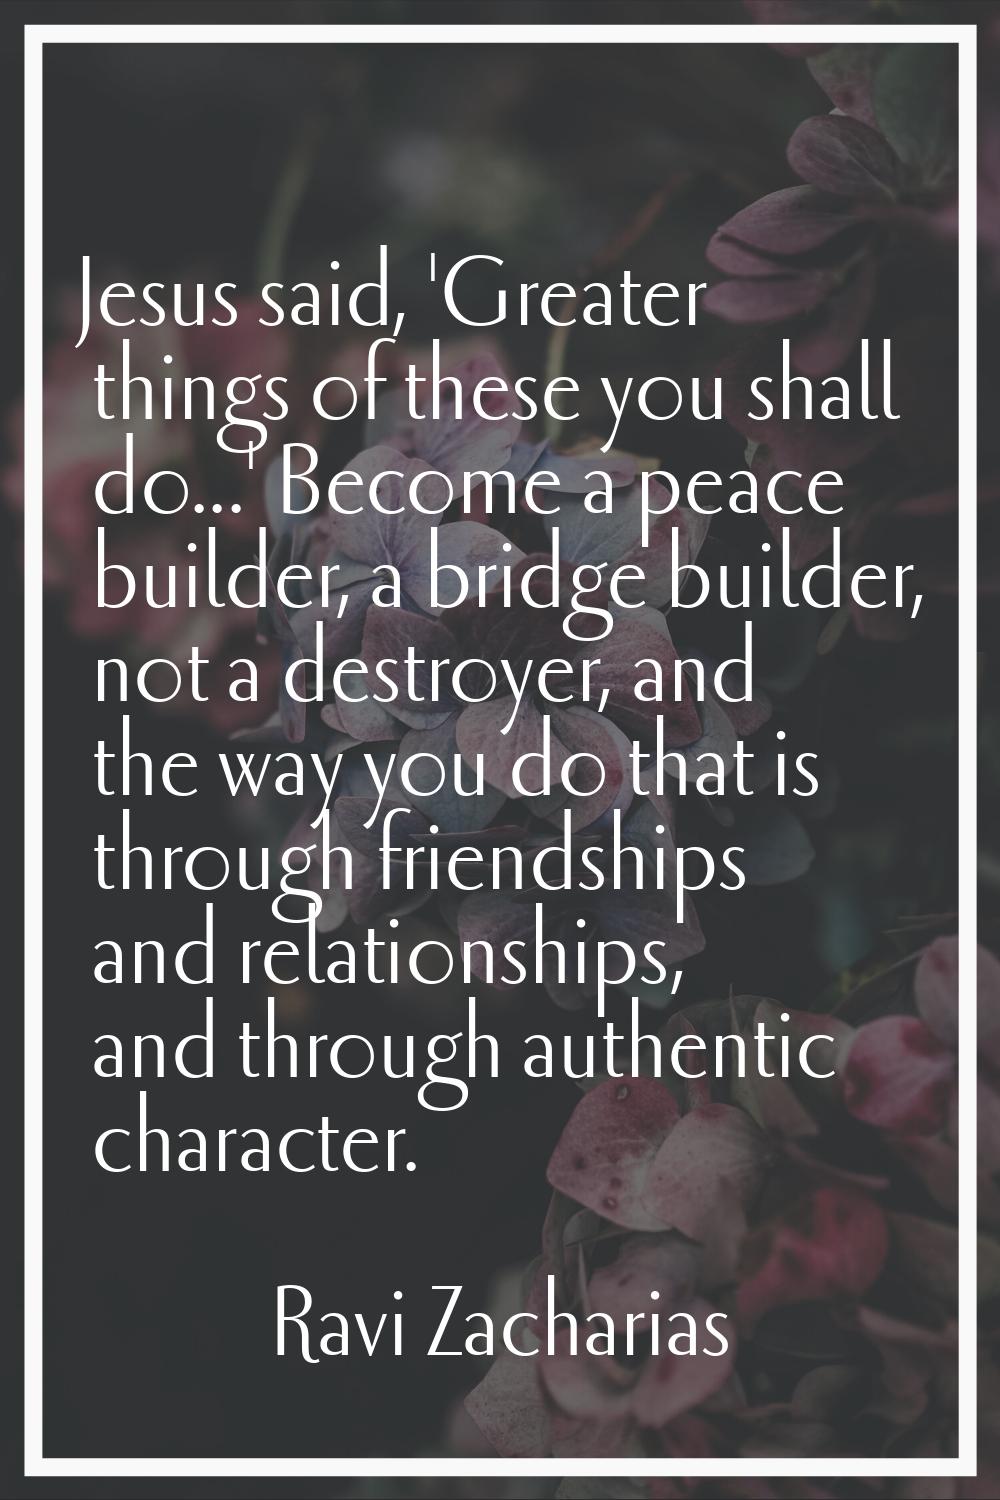 Jesus said, 'Greater things of these you shall do...' Become a peace builder, a bridge builder, not